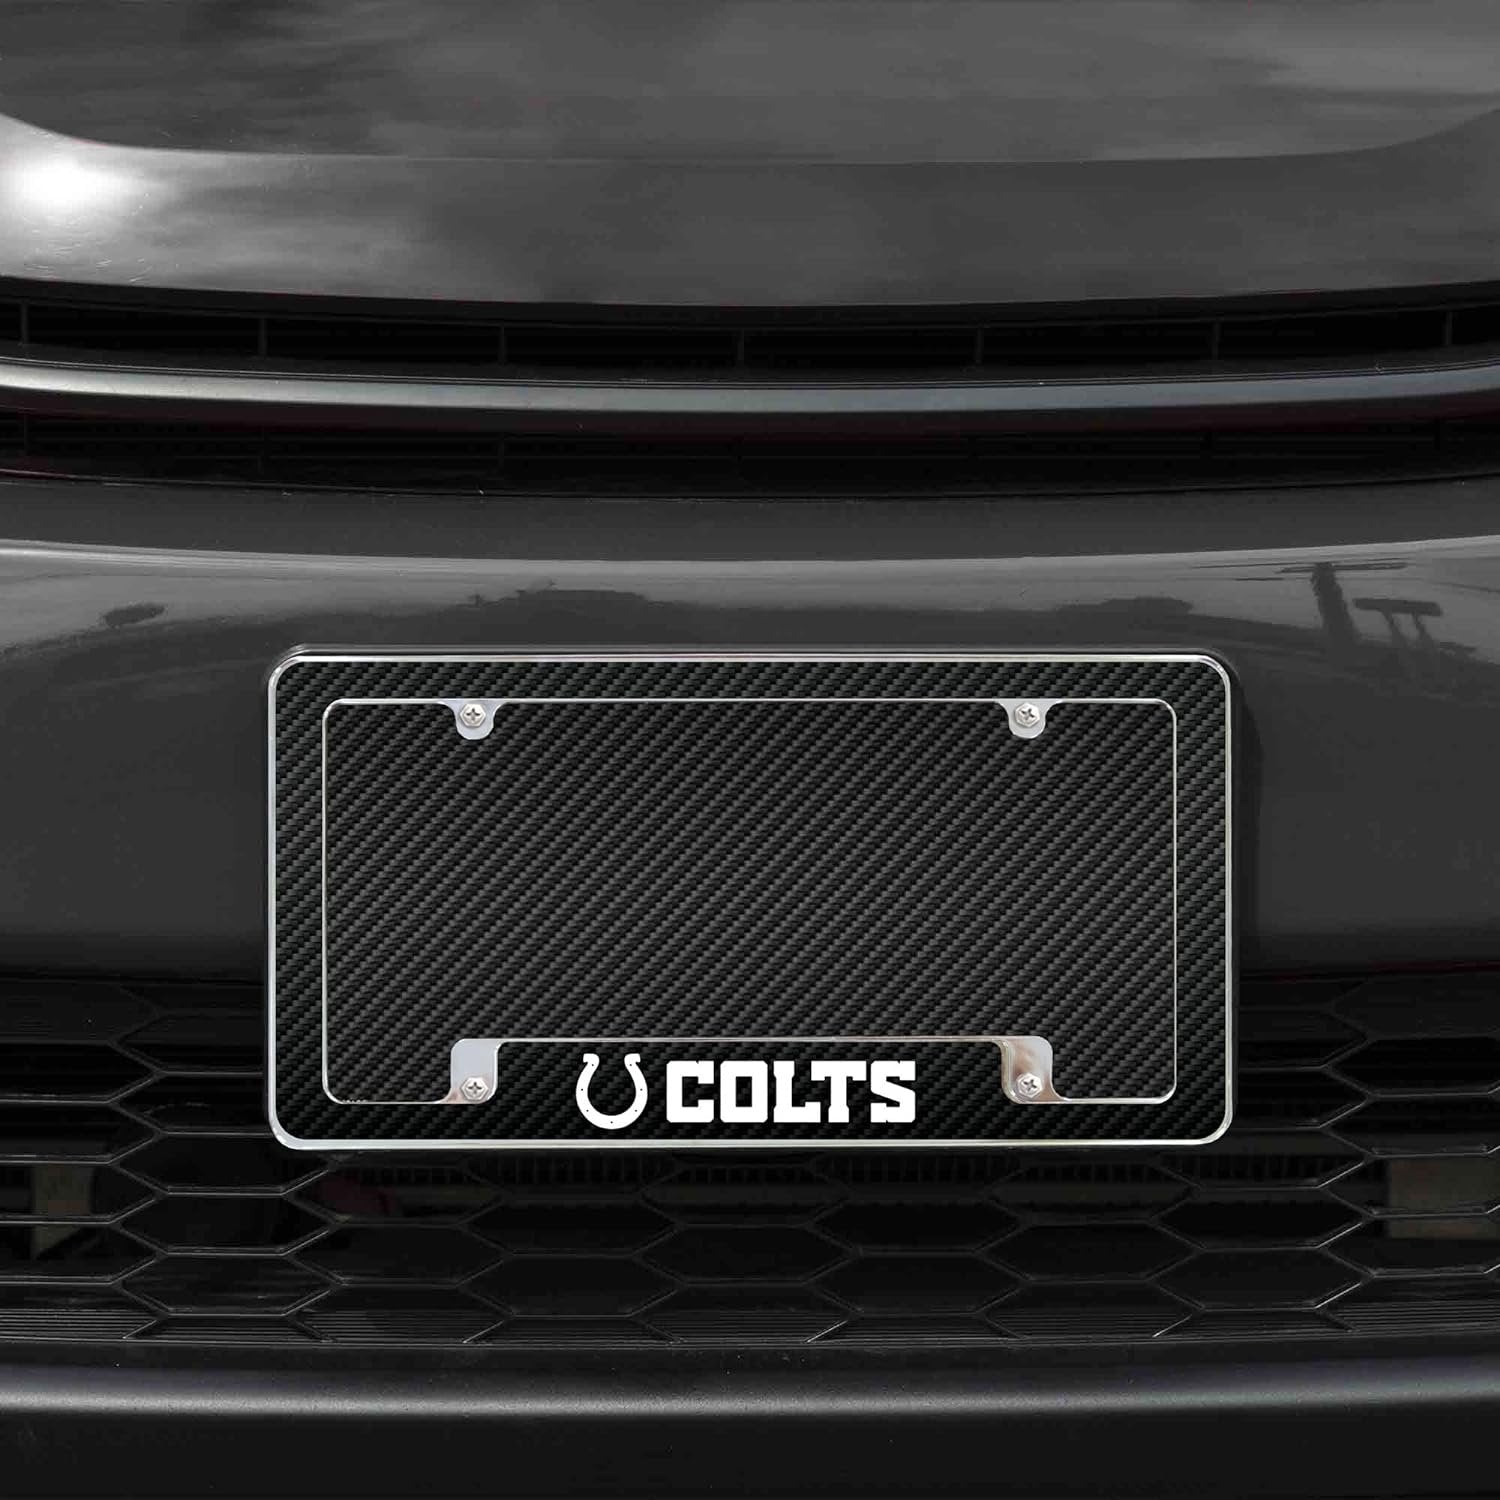 Indianapolis Colts Metal License Plate Frame Chrome Tag Cover, Carbon Fiber Design, 12x6 Inch